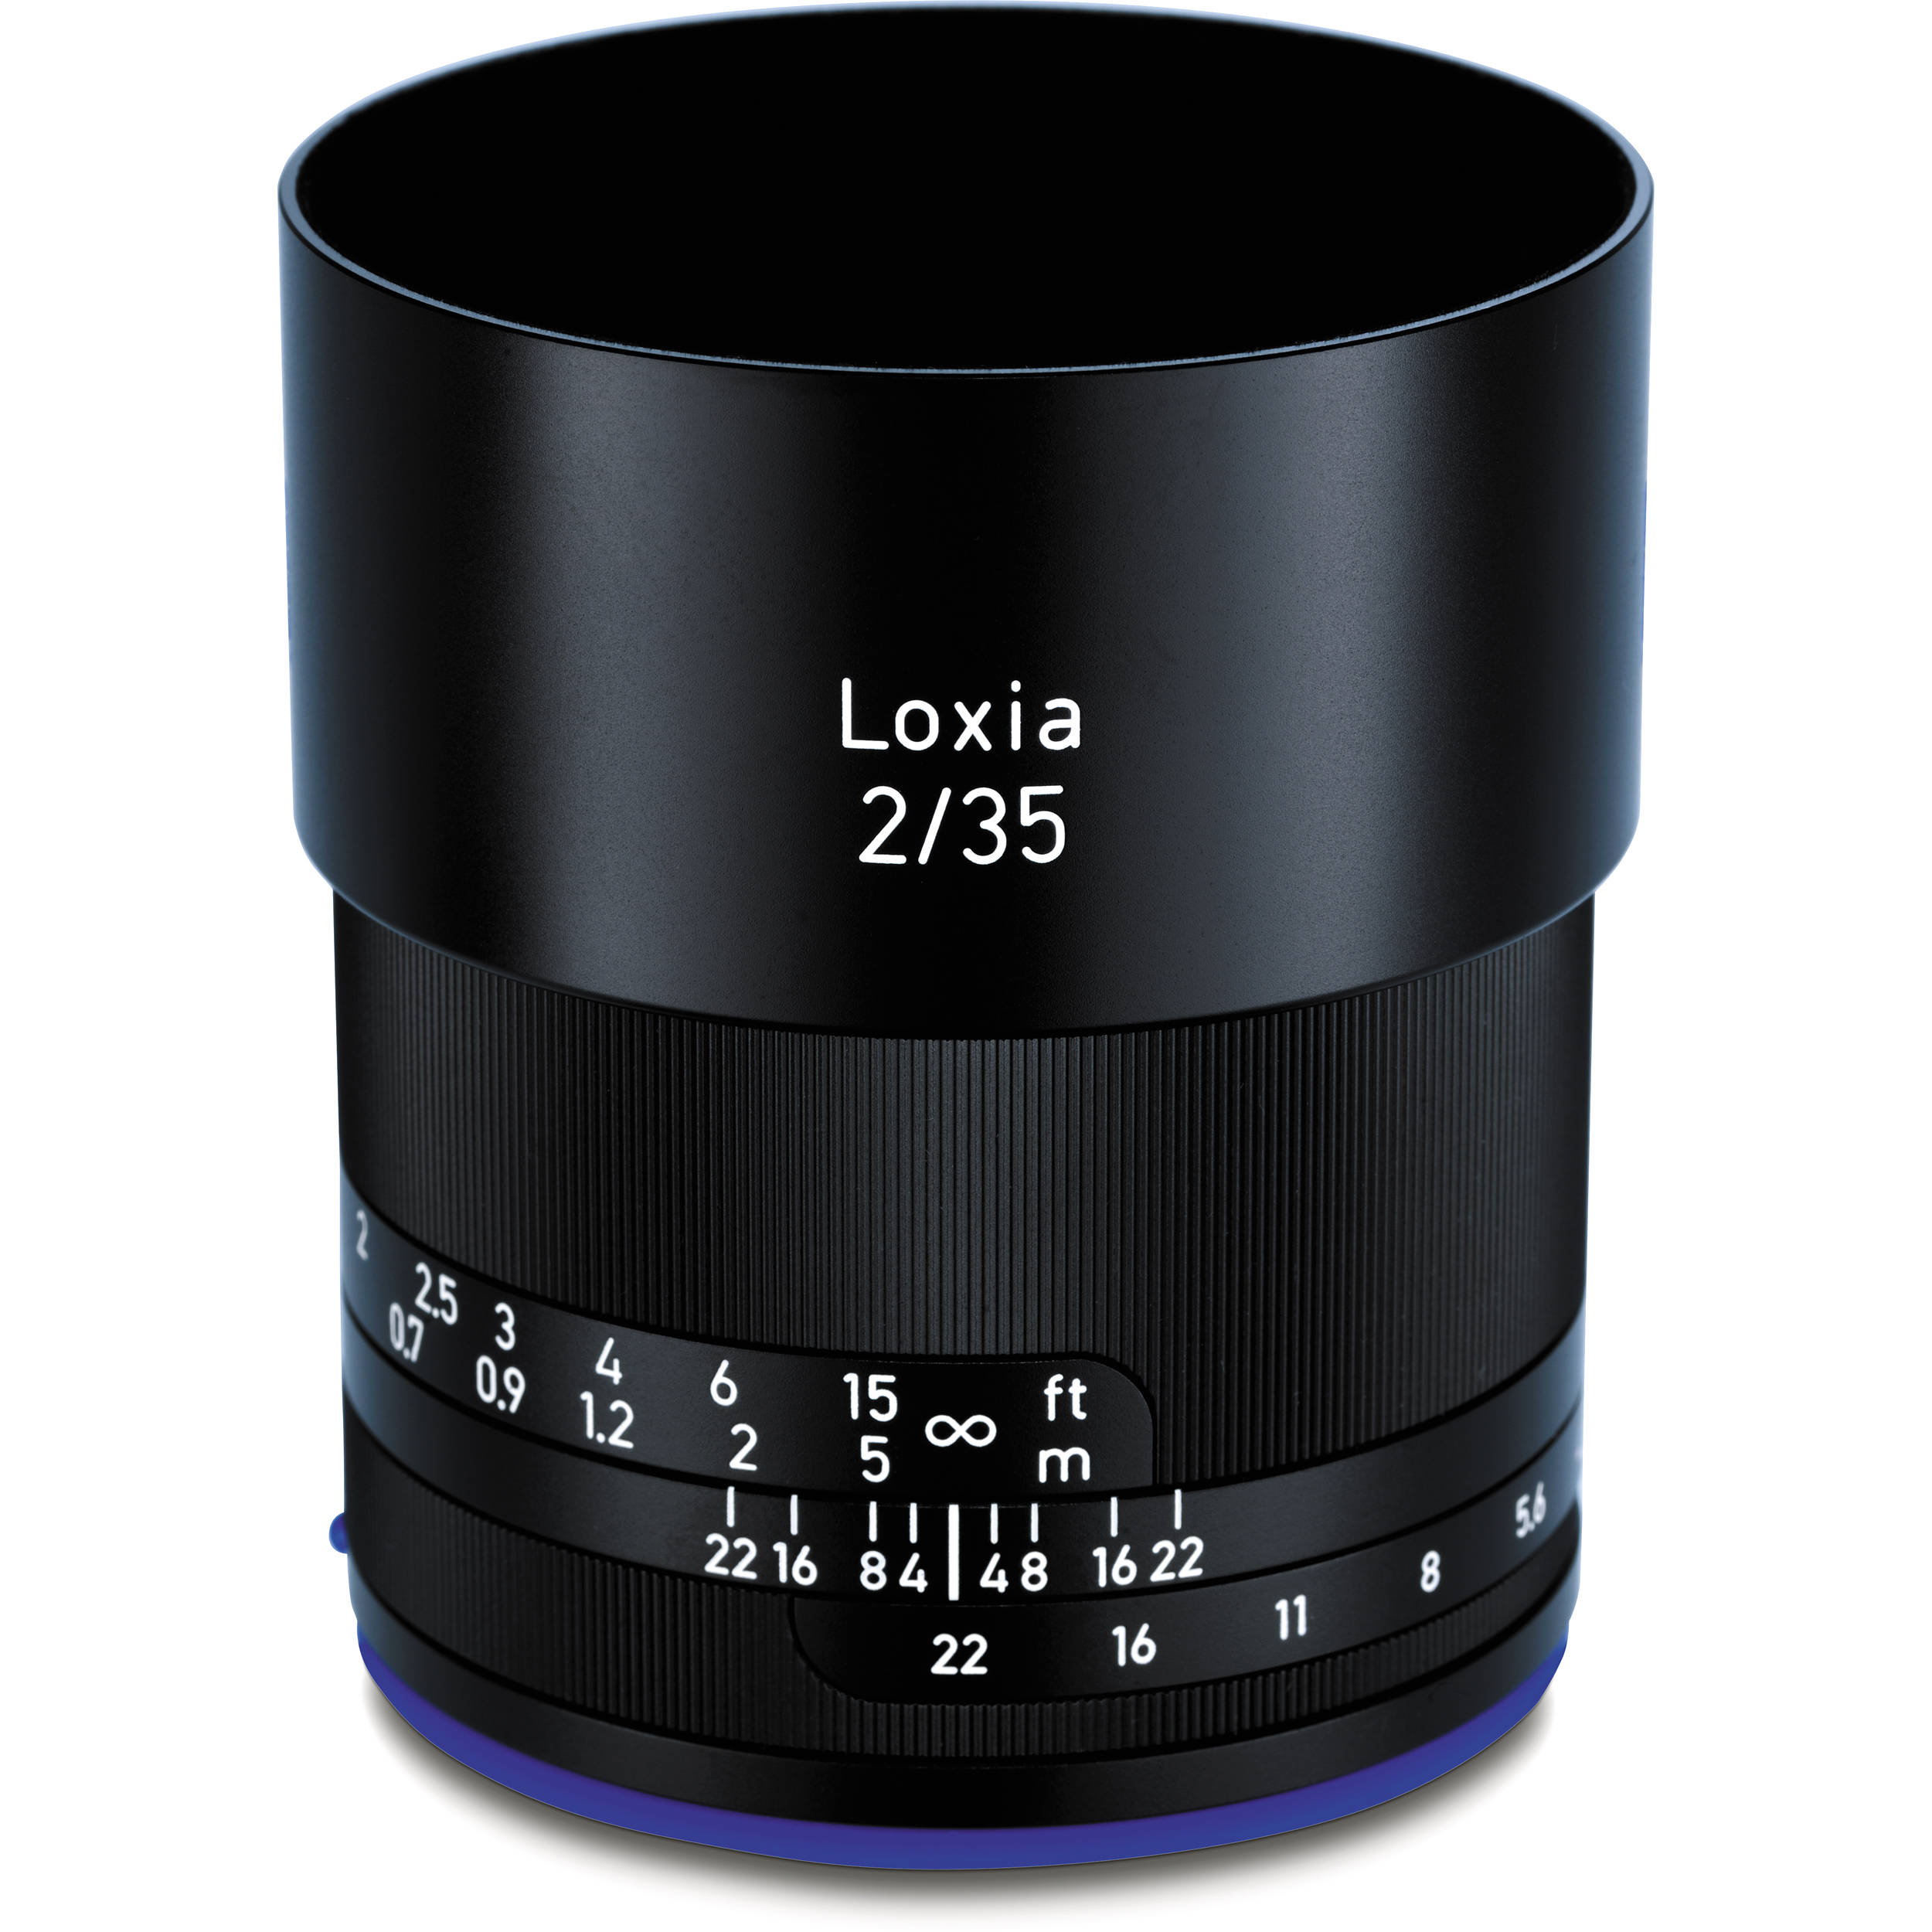 Ống Kính Zeiss Loxia 35mm f/2 Biogon T* Lens for Sony E Mount